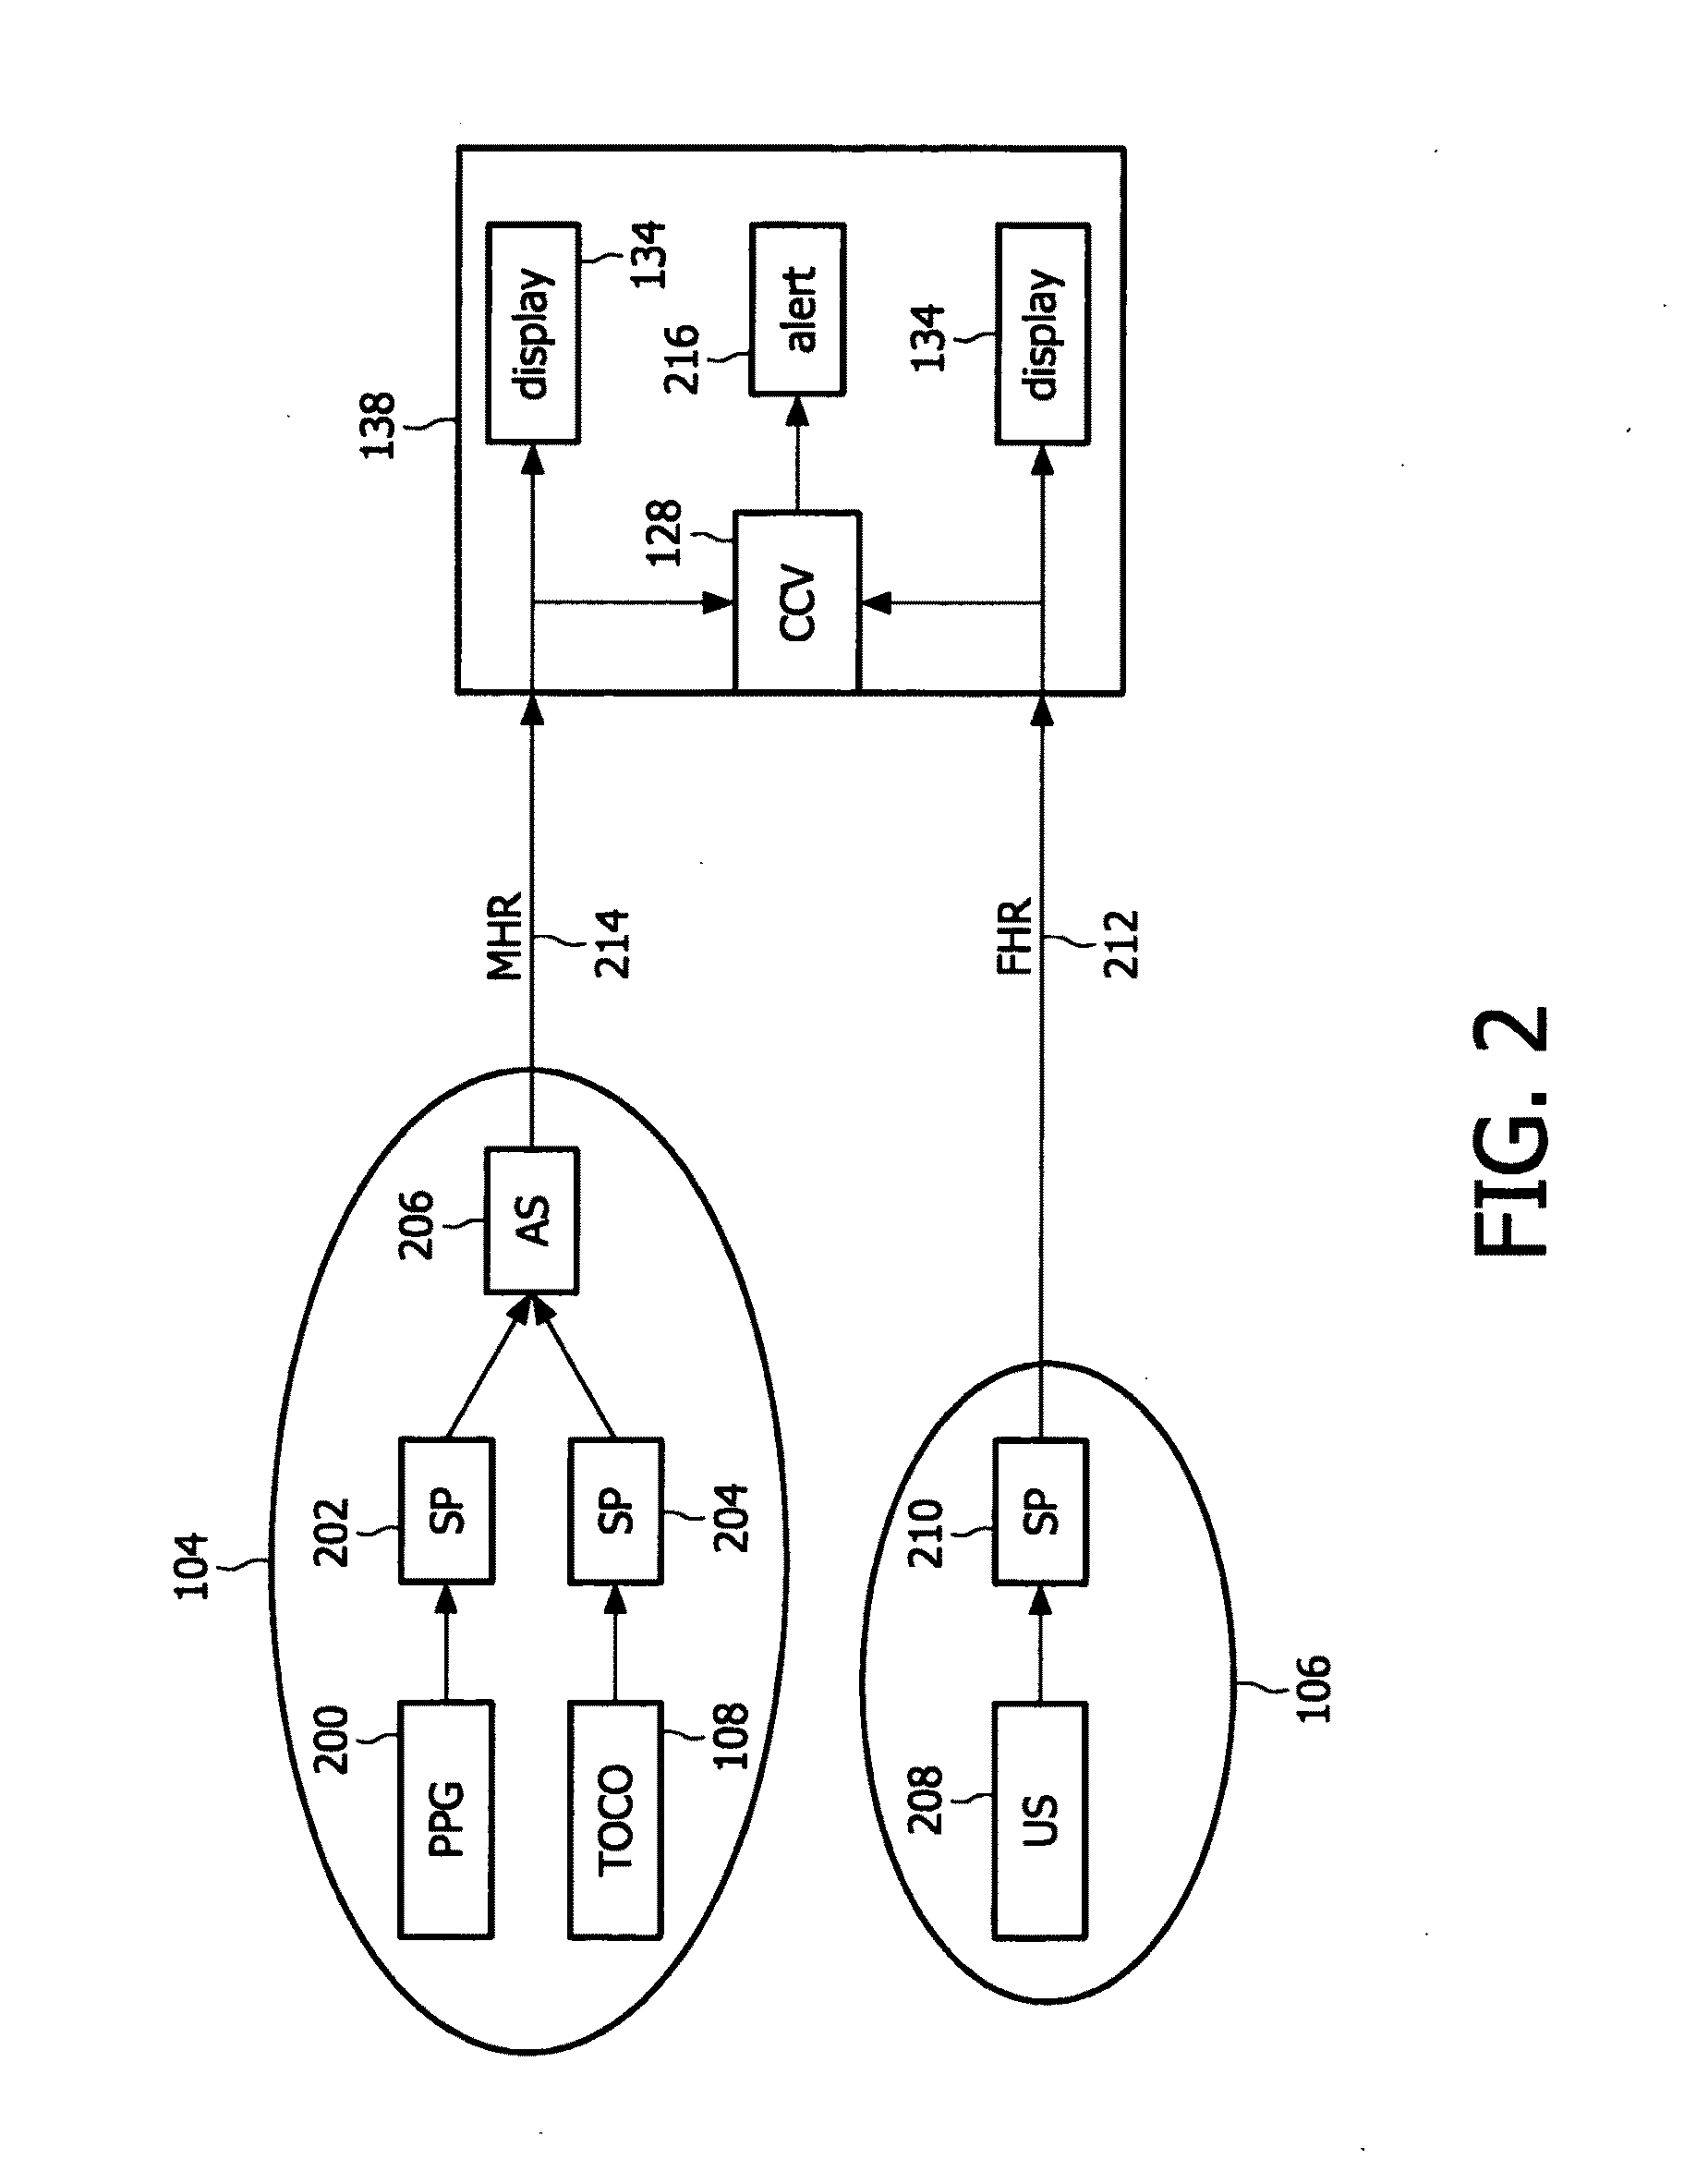 Method of monitoring a fetal heart rate